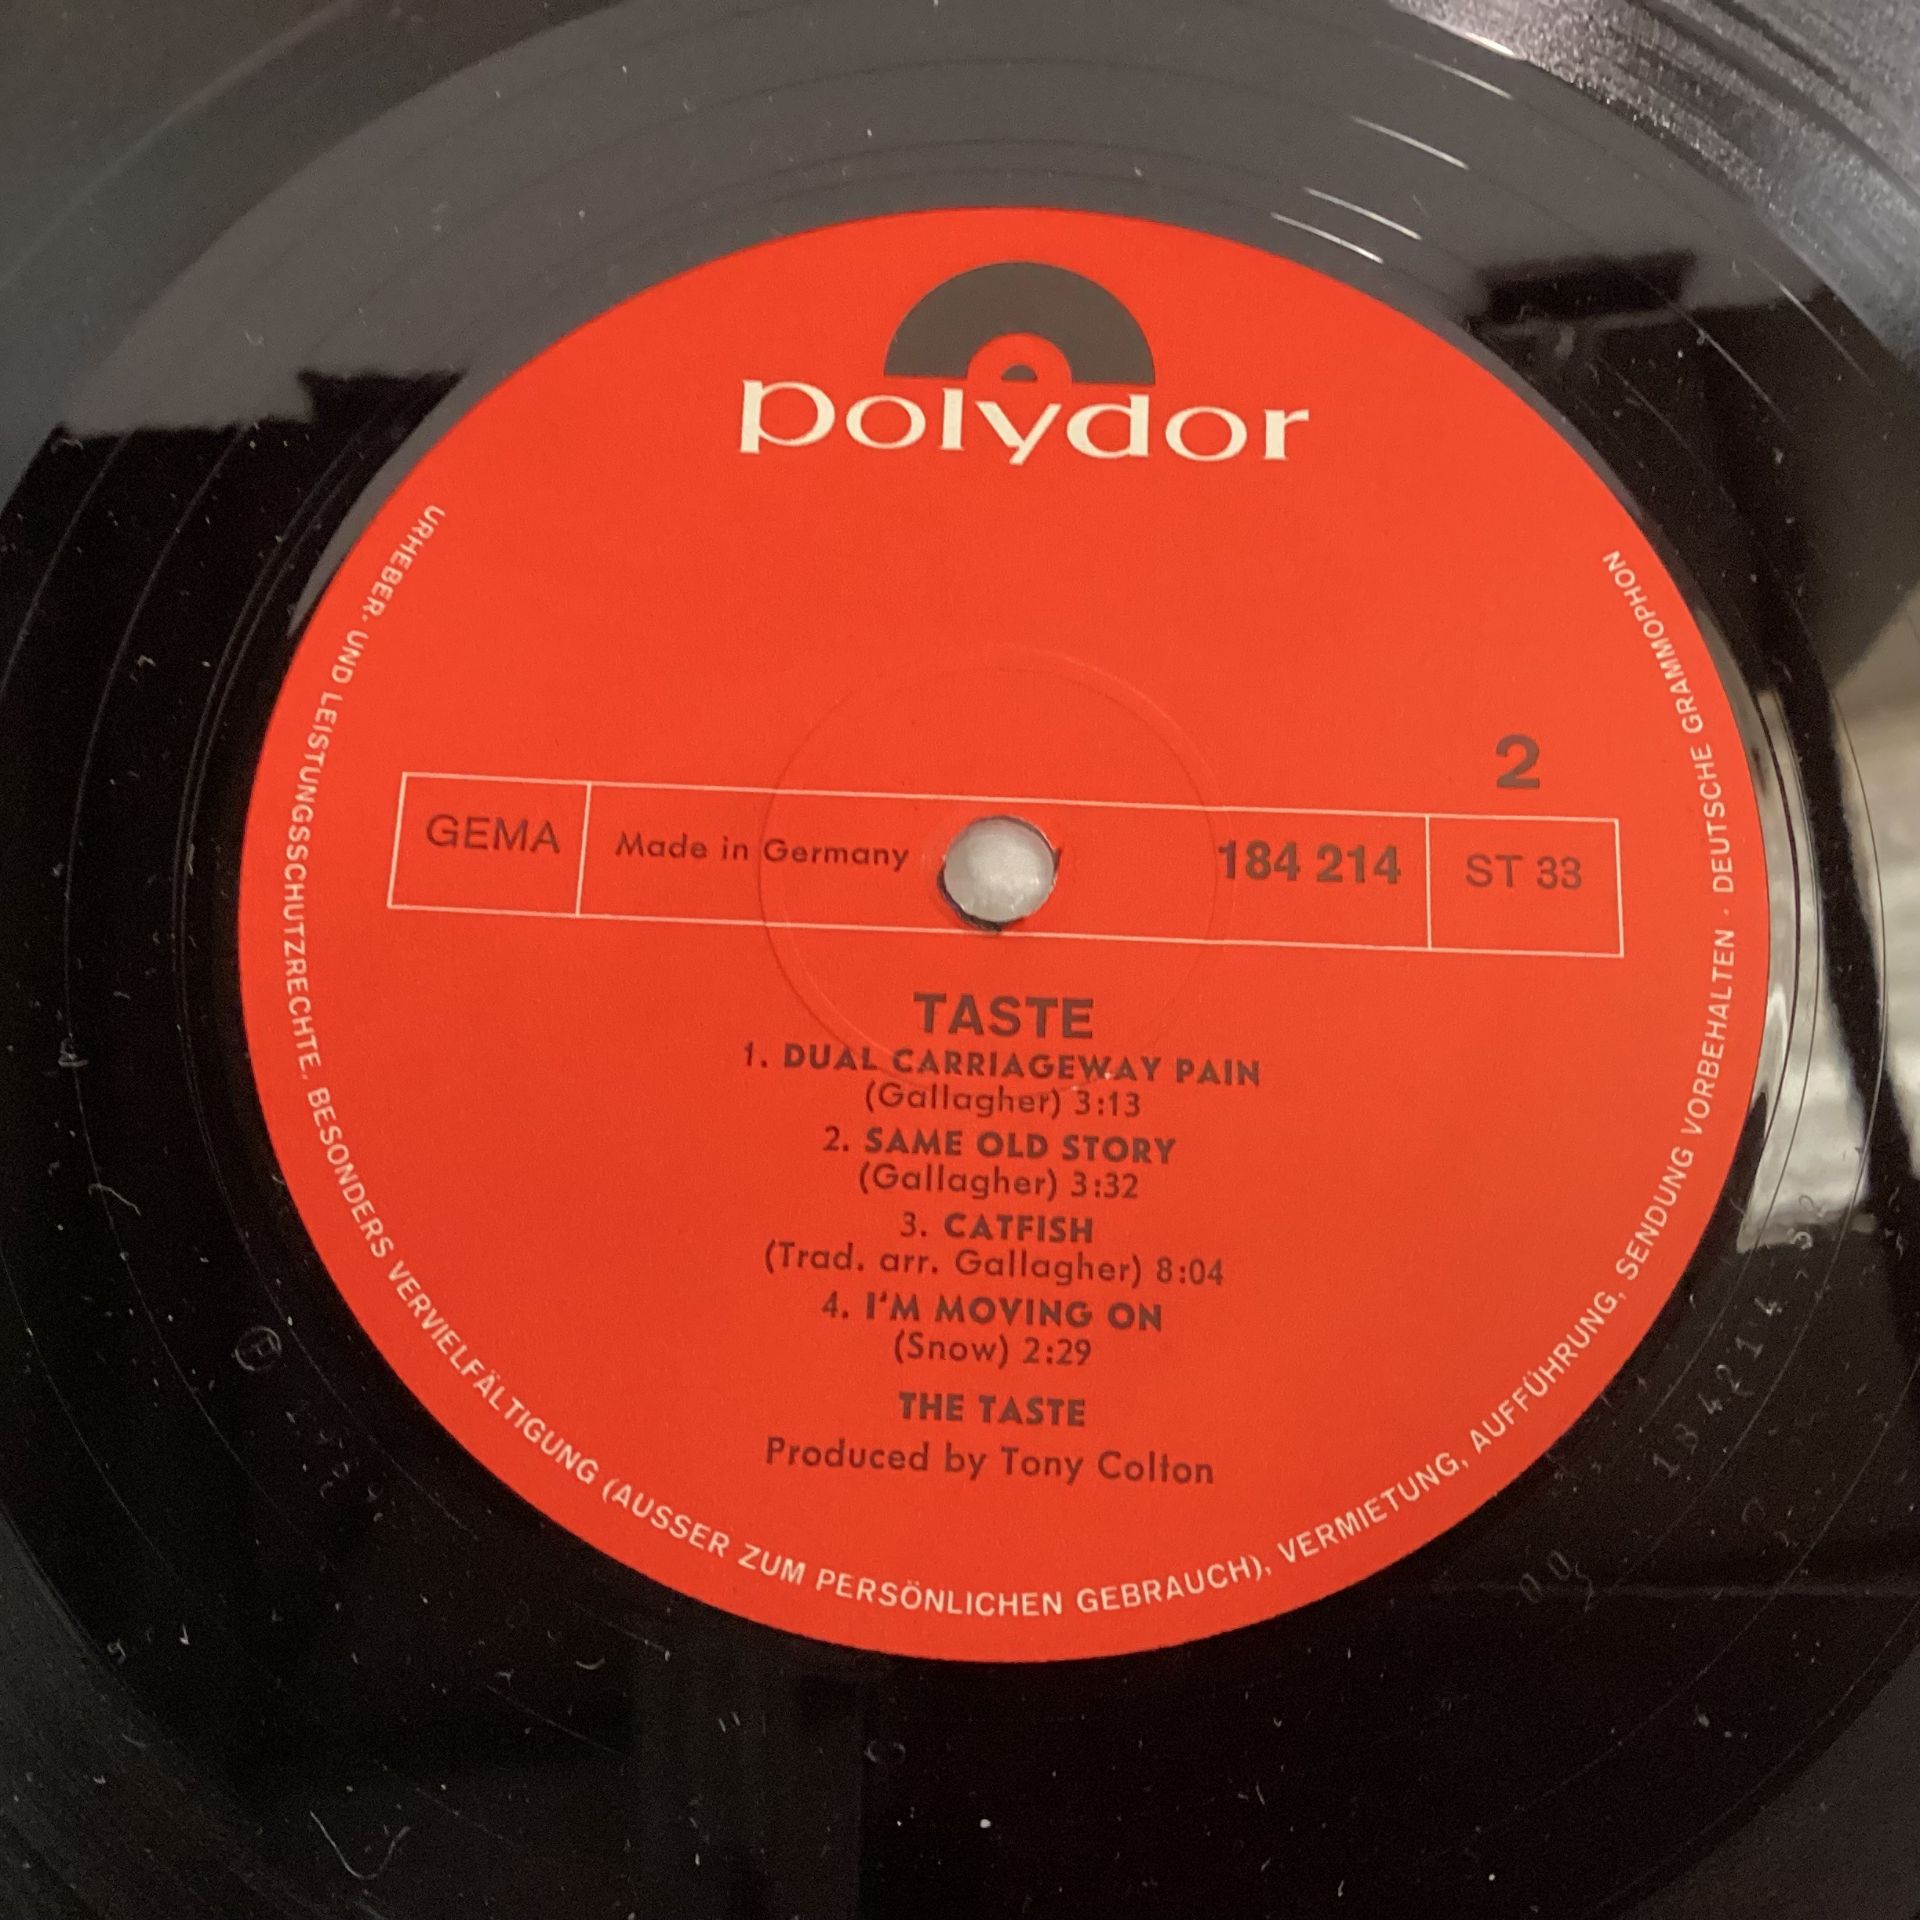 TASTE DEBUT LP FEATURING RORY GALLAGHER. Nice Psych album found here on Polydor German Label No. - Image 3 of 4